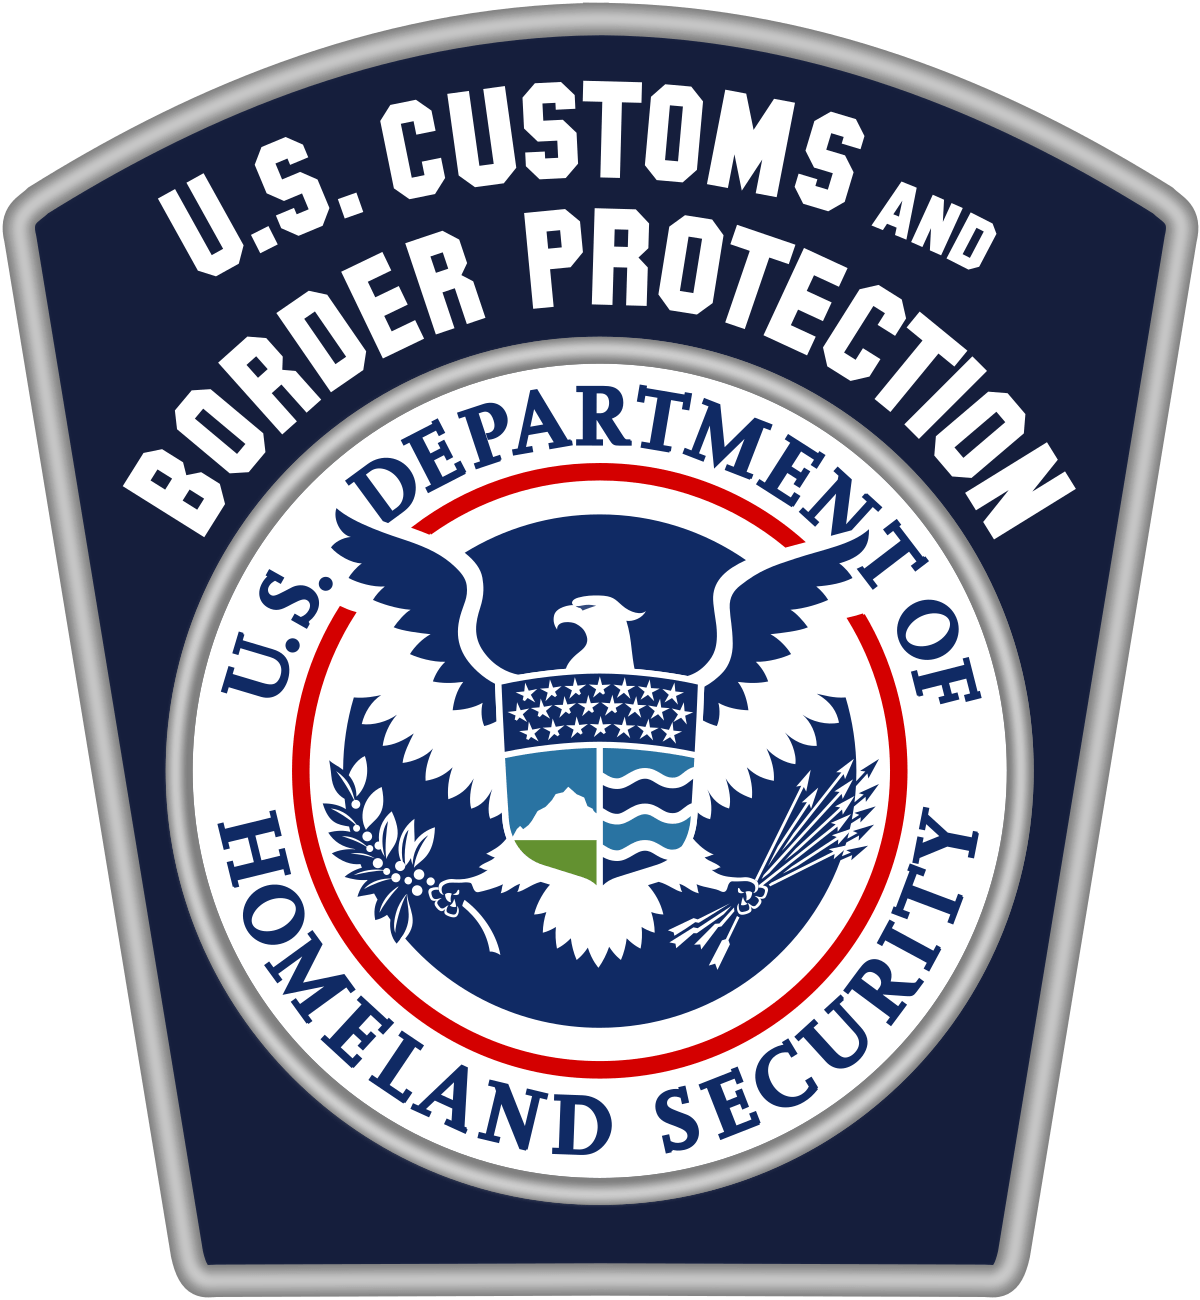 Border Protection Agency